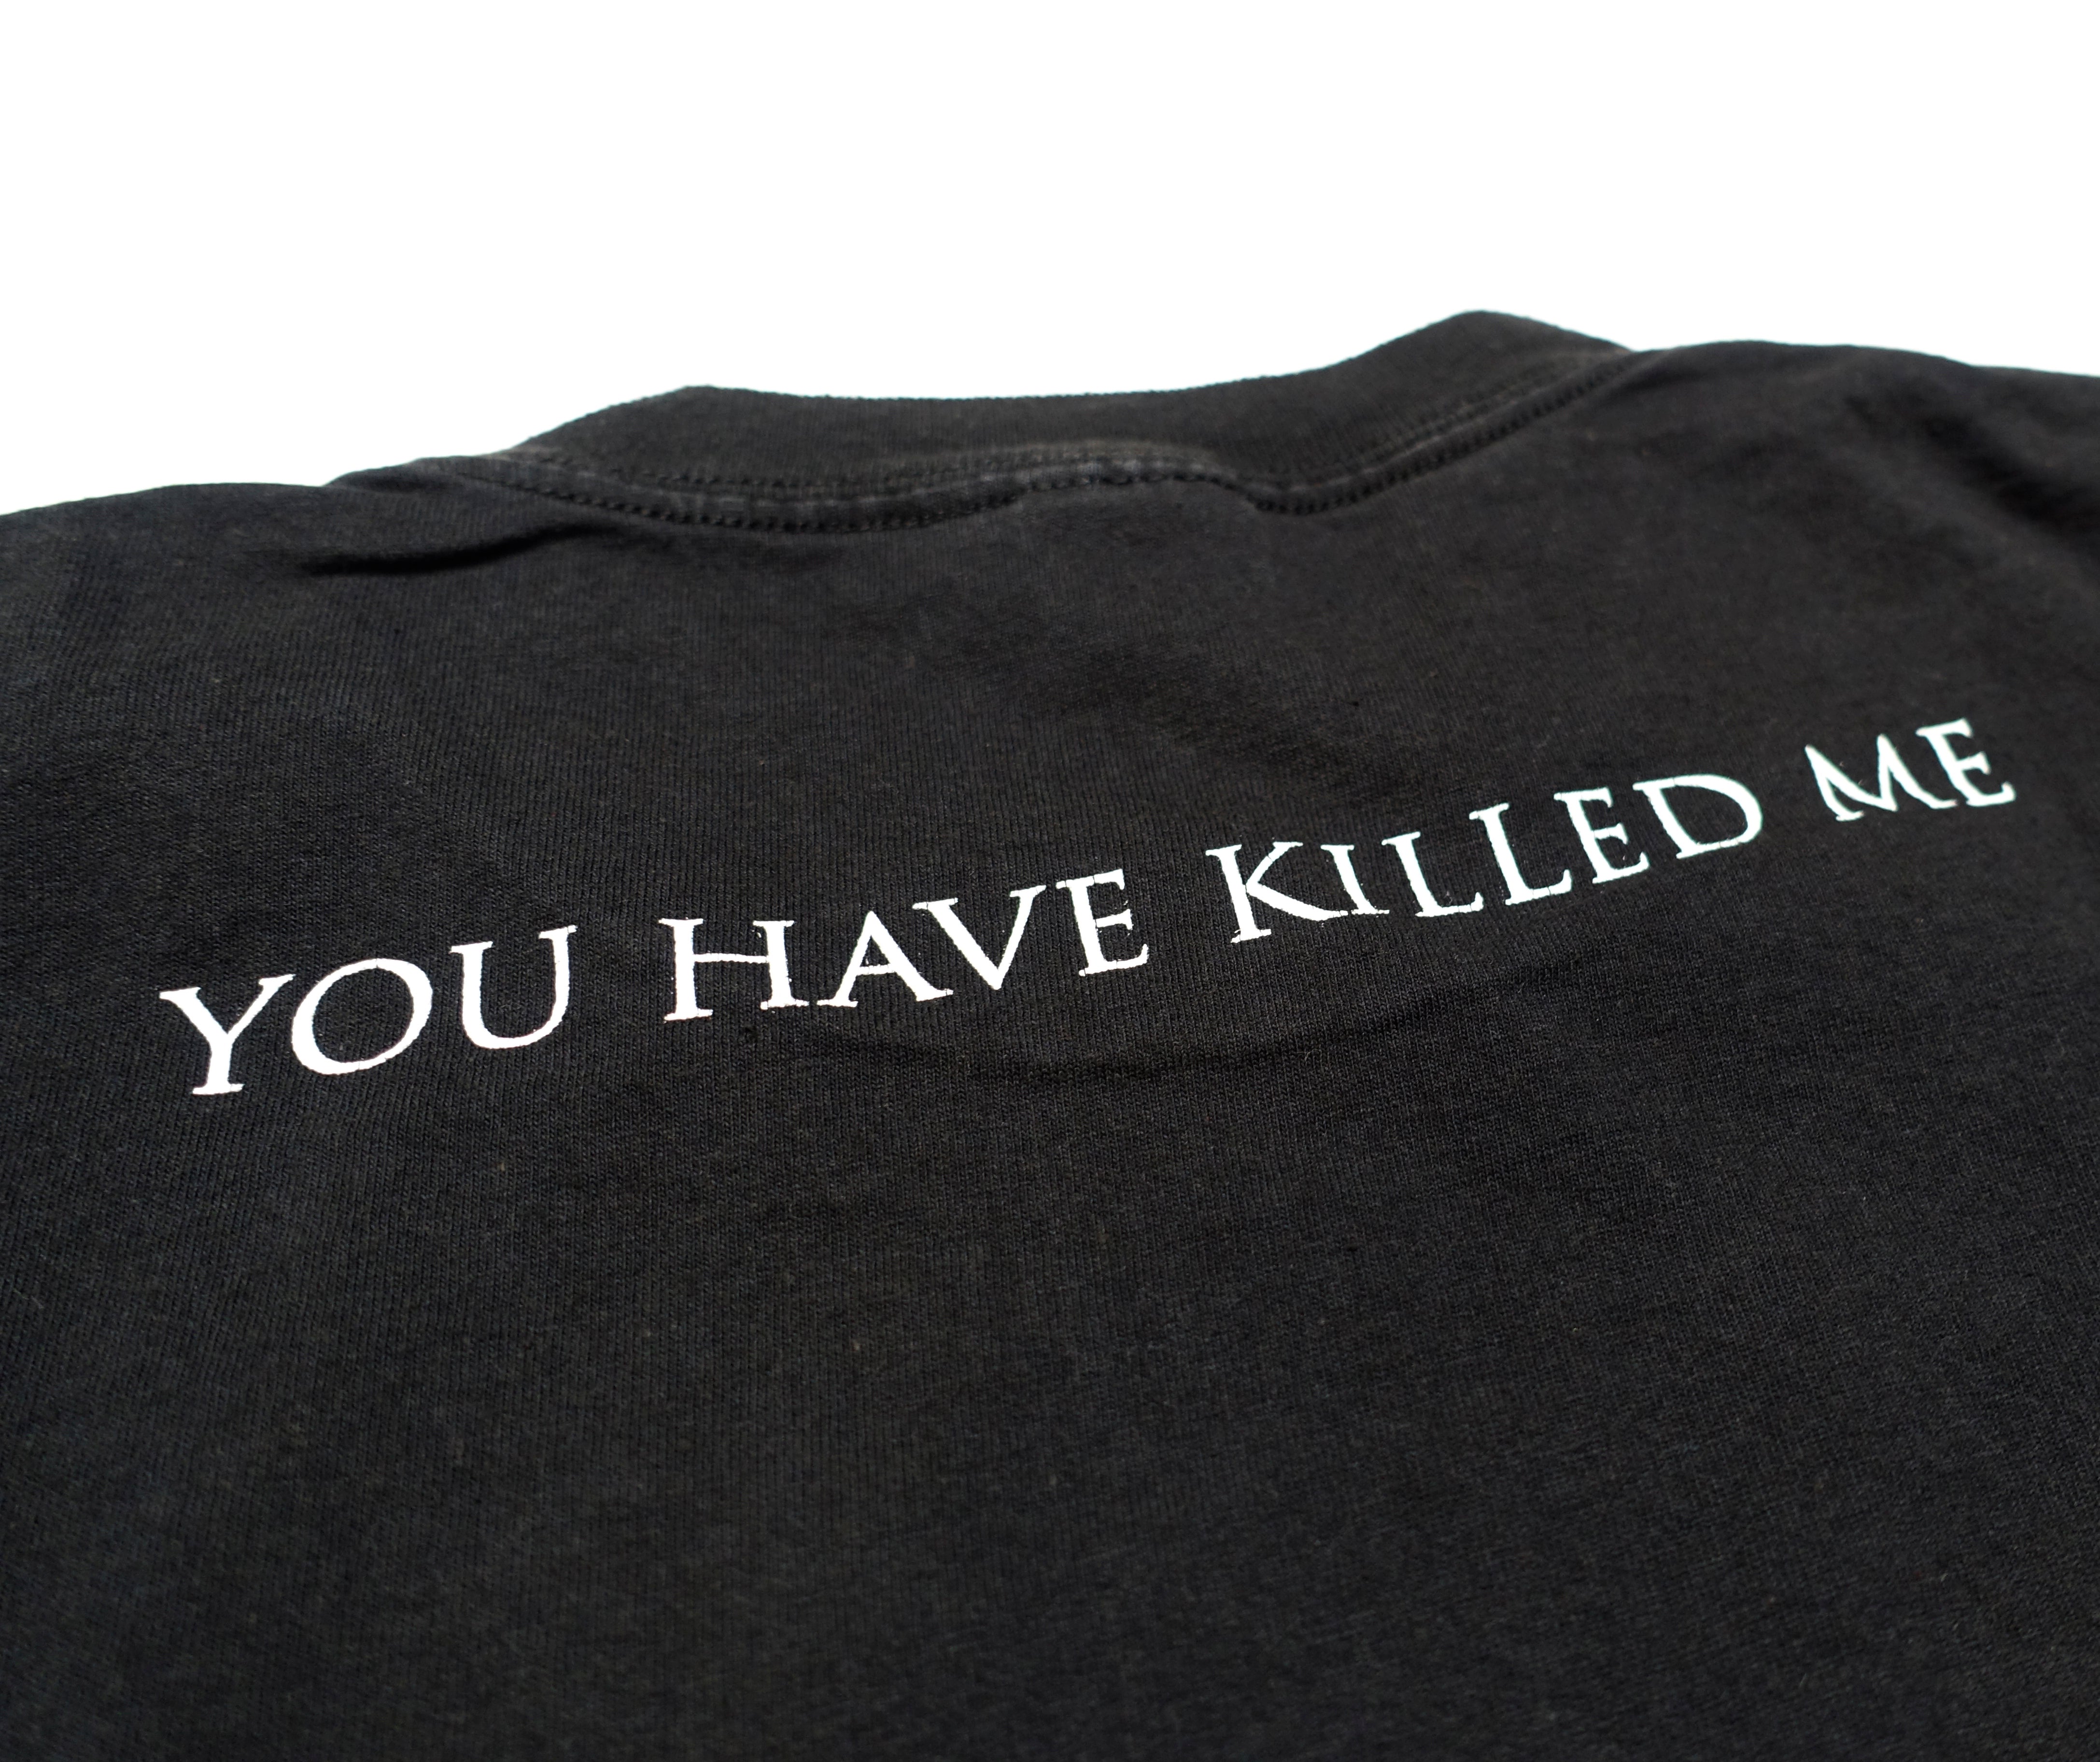 Morrissey - You Have Killed Me Promo Only Shirt Size Large